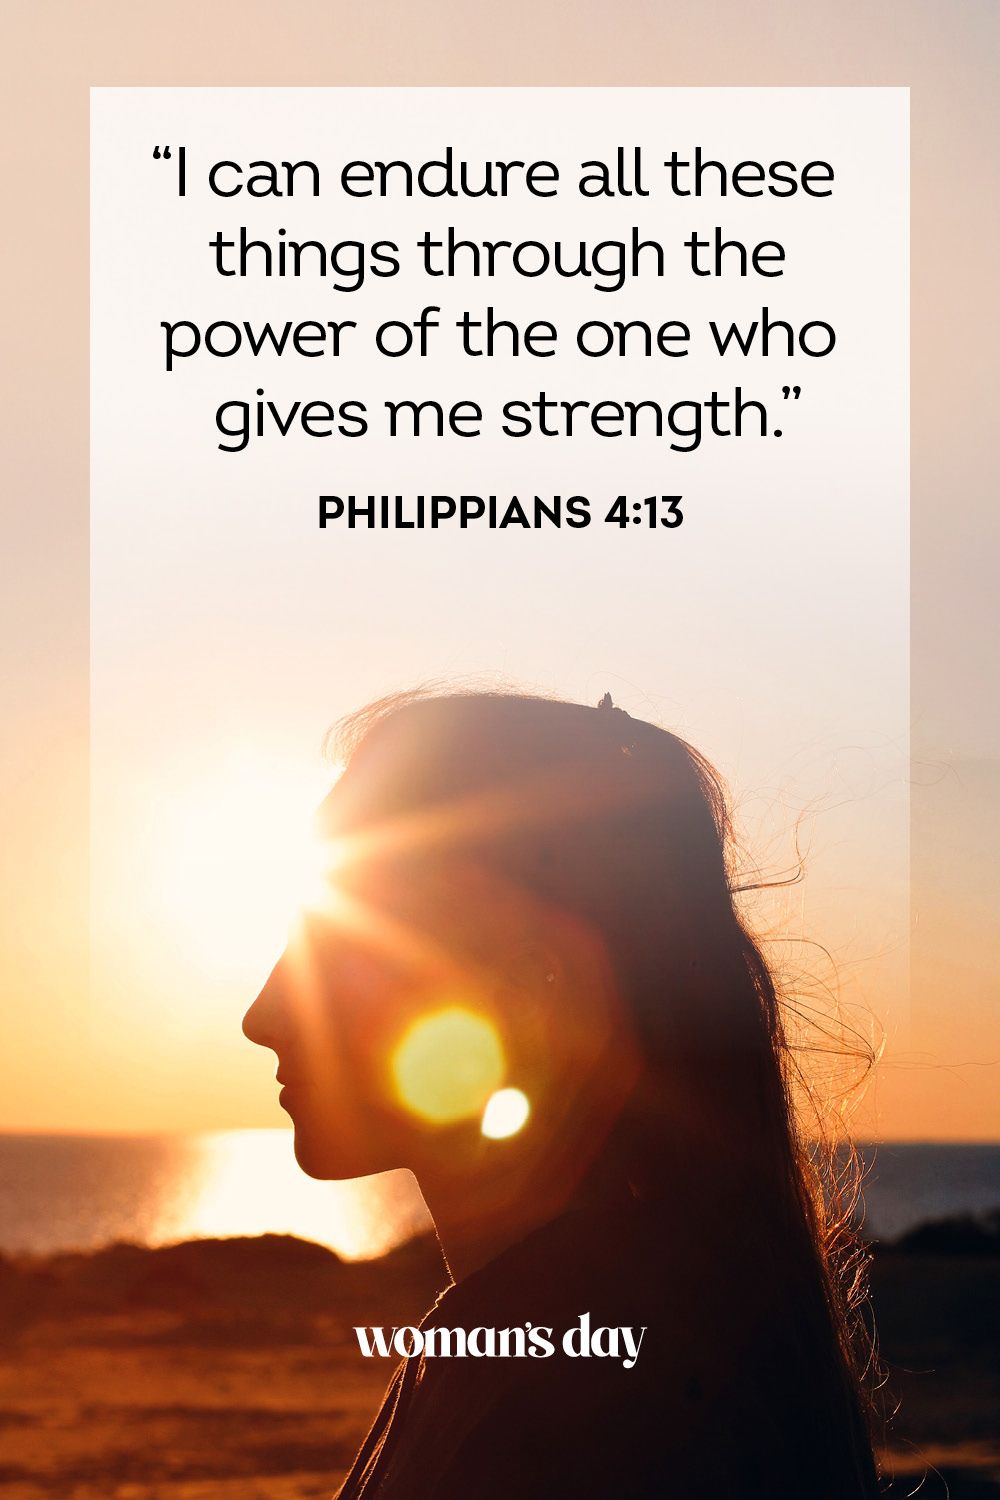 60 Best Bible Quotes and Powerful Verses About Life, Love & More